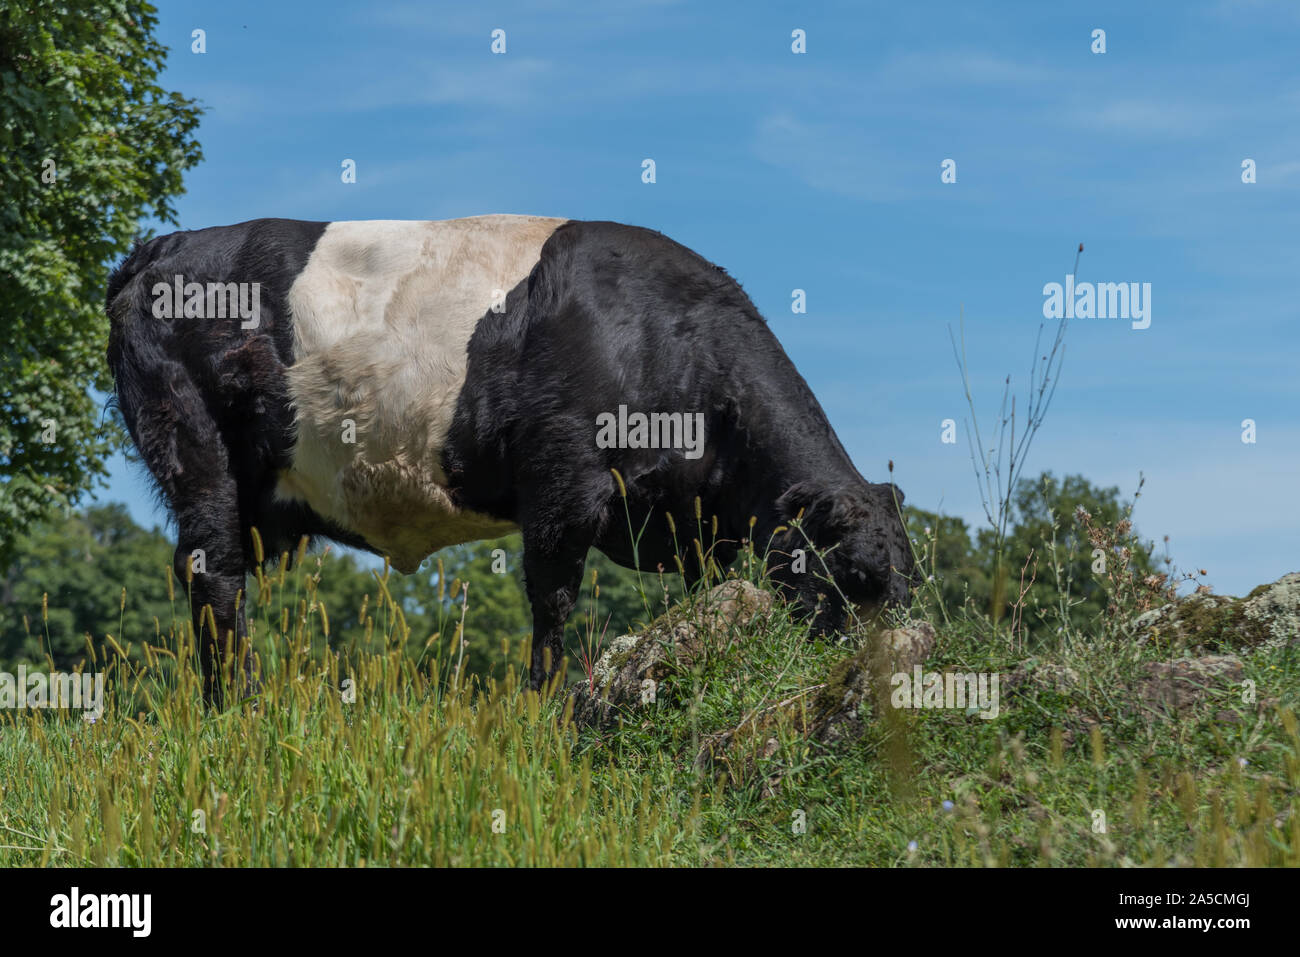 Belted Galloway Cow grazing in a field in Litchfield, Ct, USA with blue sky and clouds in background Stock Photo